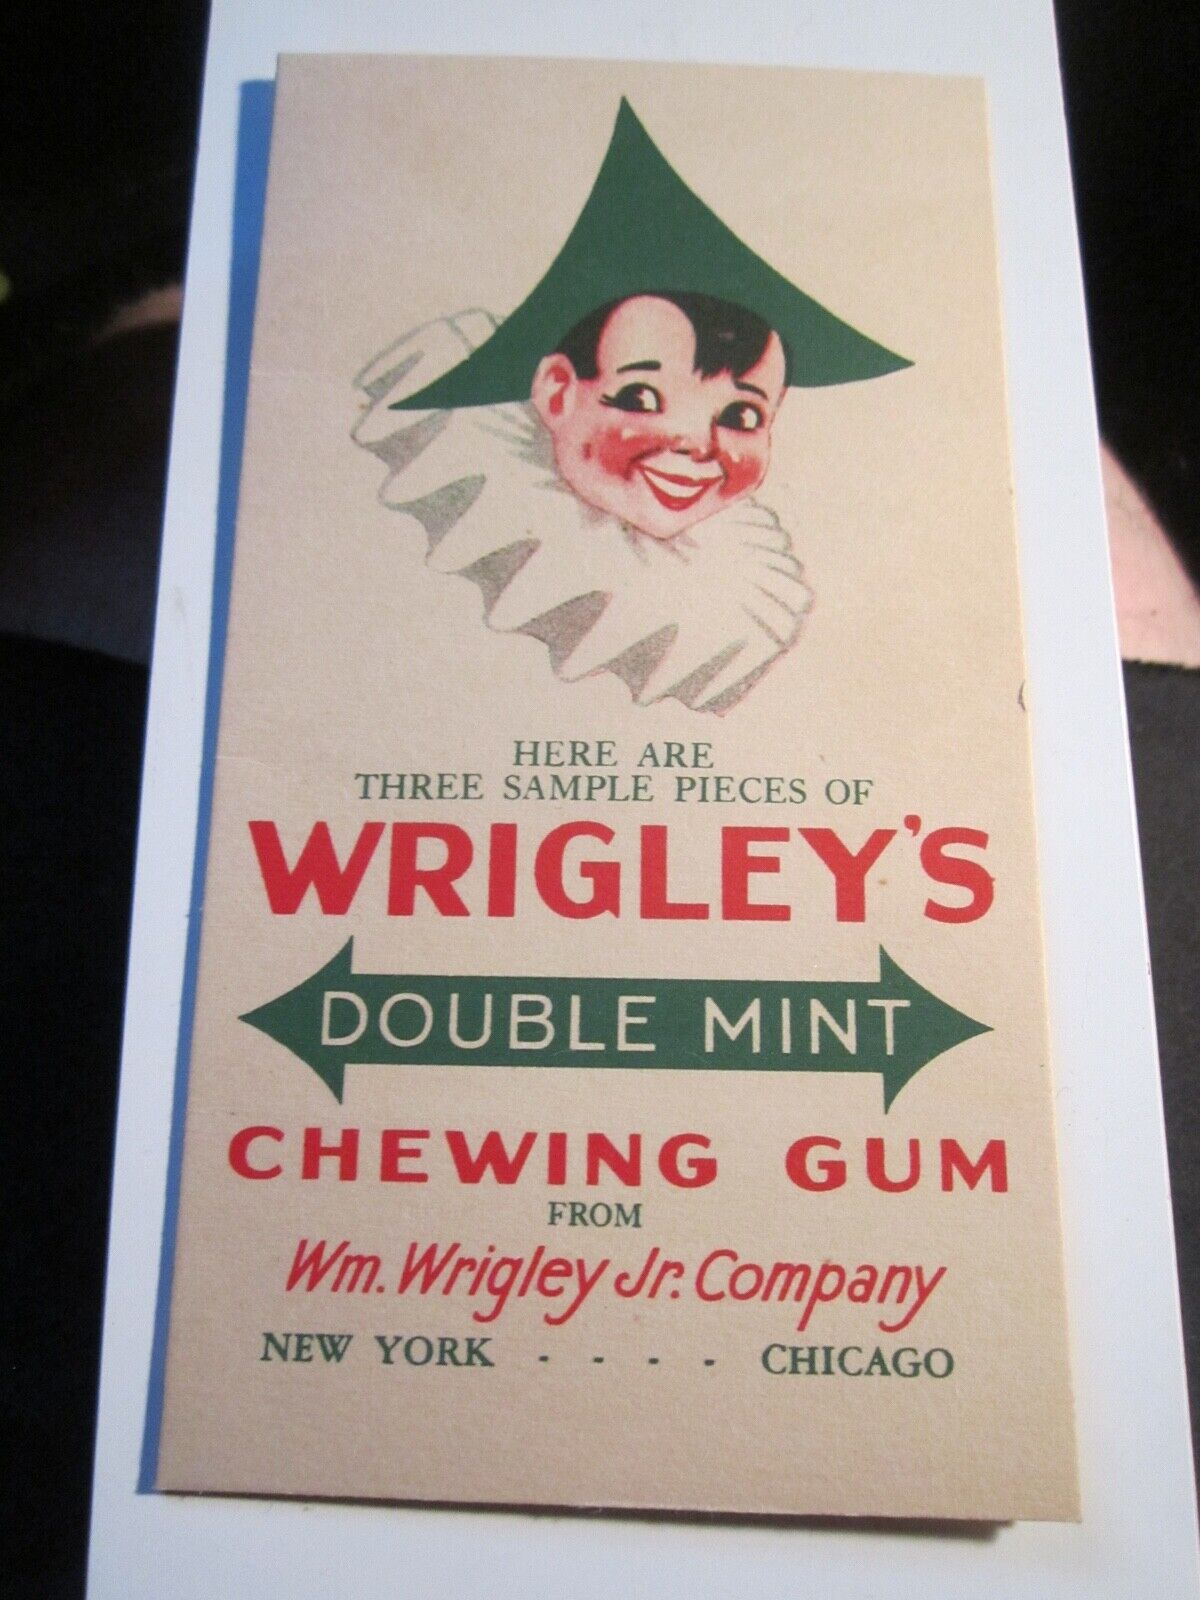 VINTAGE WRIGLEY'S DOUBLE MINT CHEWING GUM ADVERTISEMENT WITH INSERTS- BBA-45